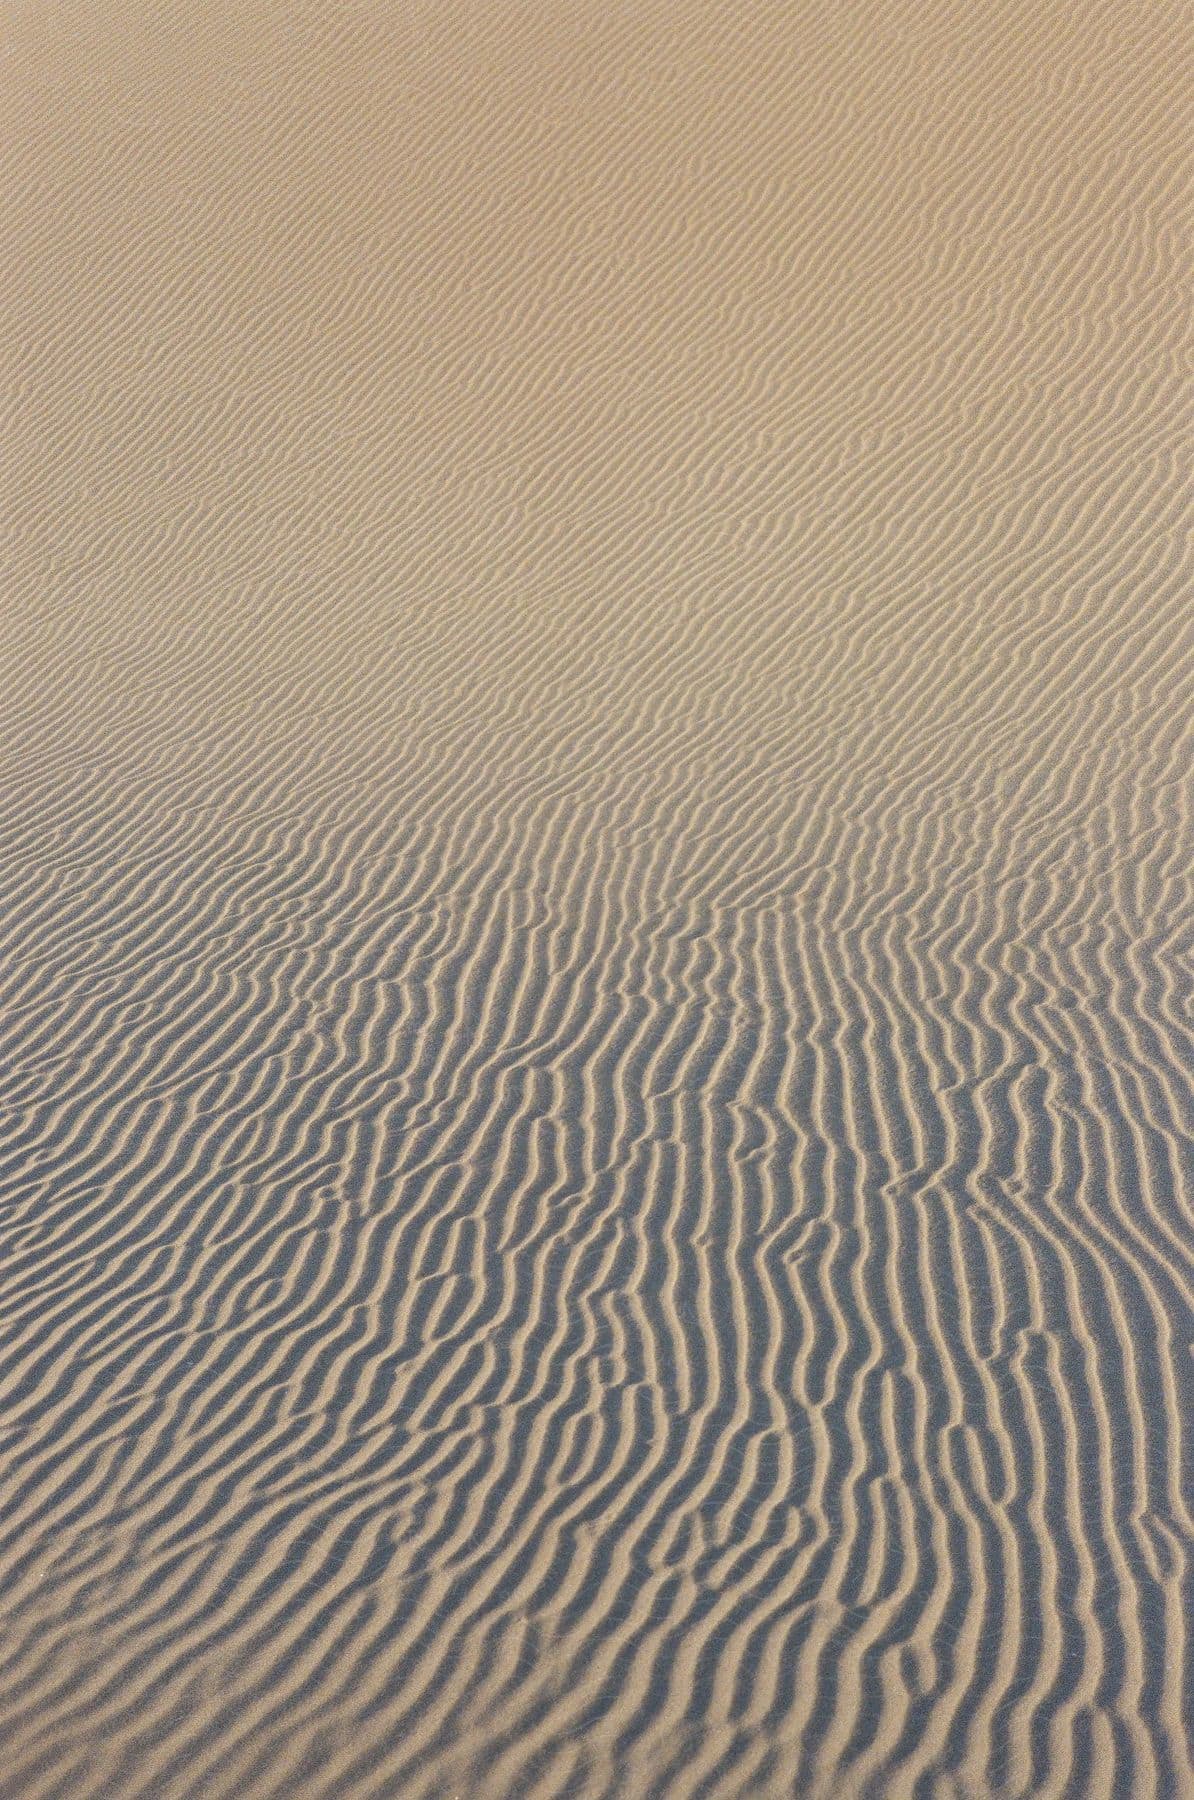 Stock photo of a vast field covered in fine sand arranged in intricate patterns creating a symmetrical design